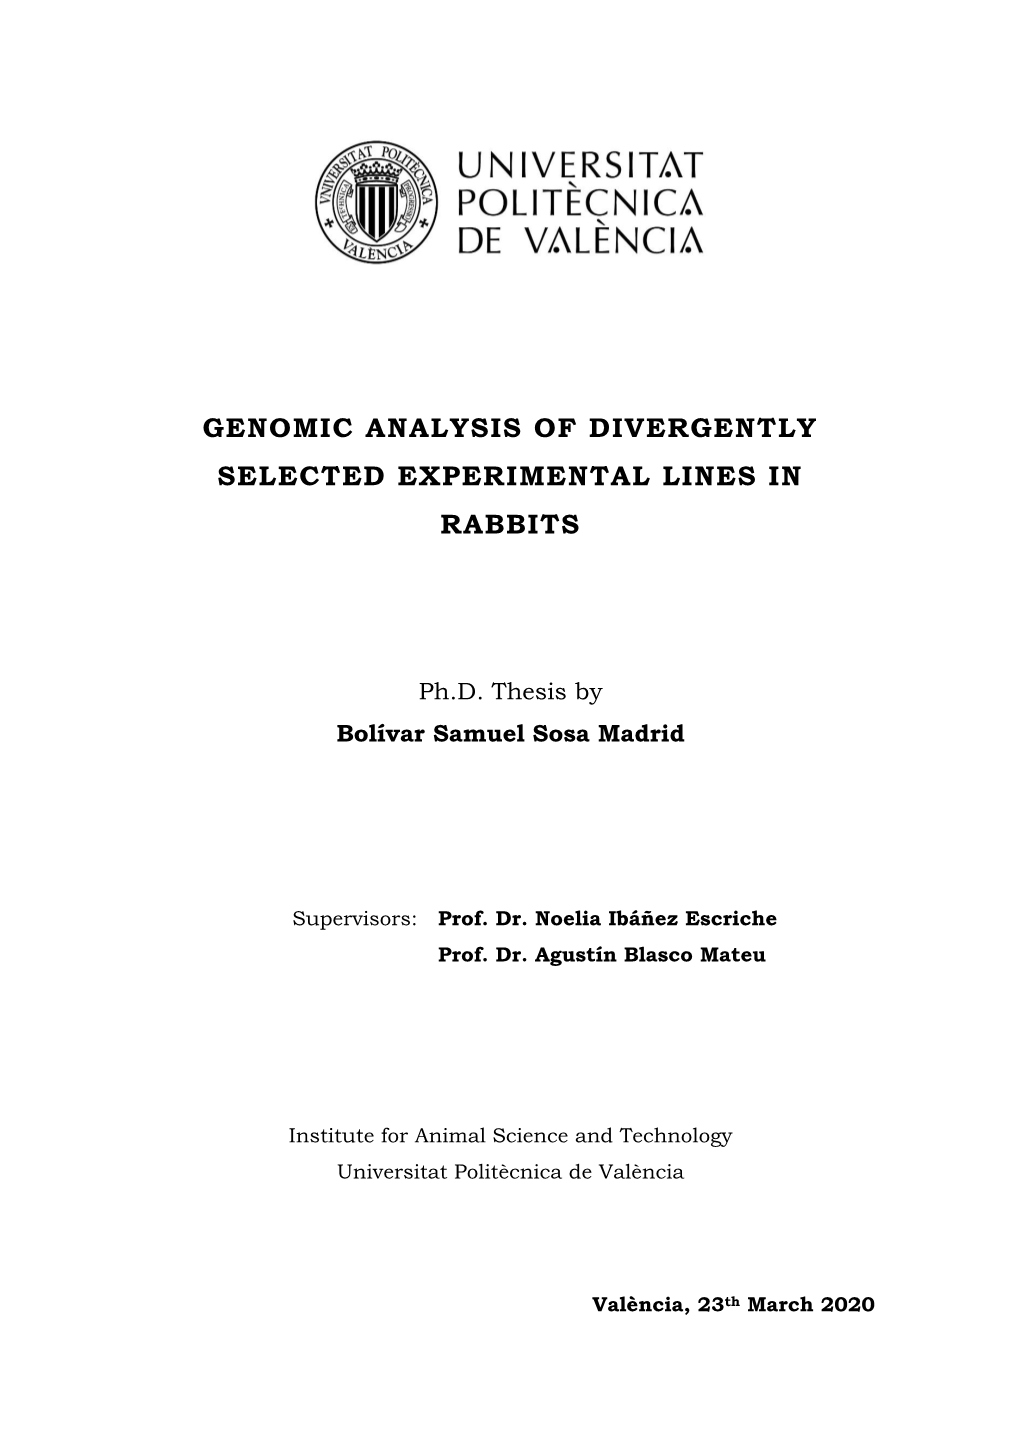 Genomic Analysis of Divergently Selected Experimental Lines in Rabbits